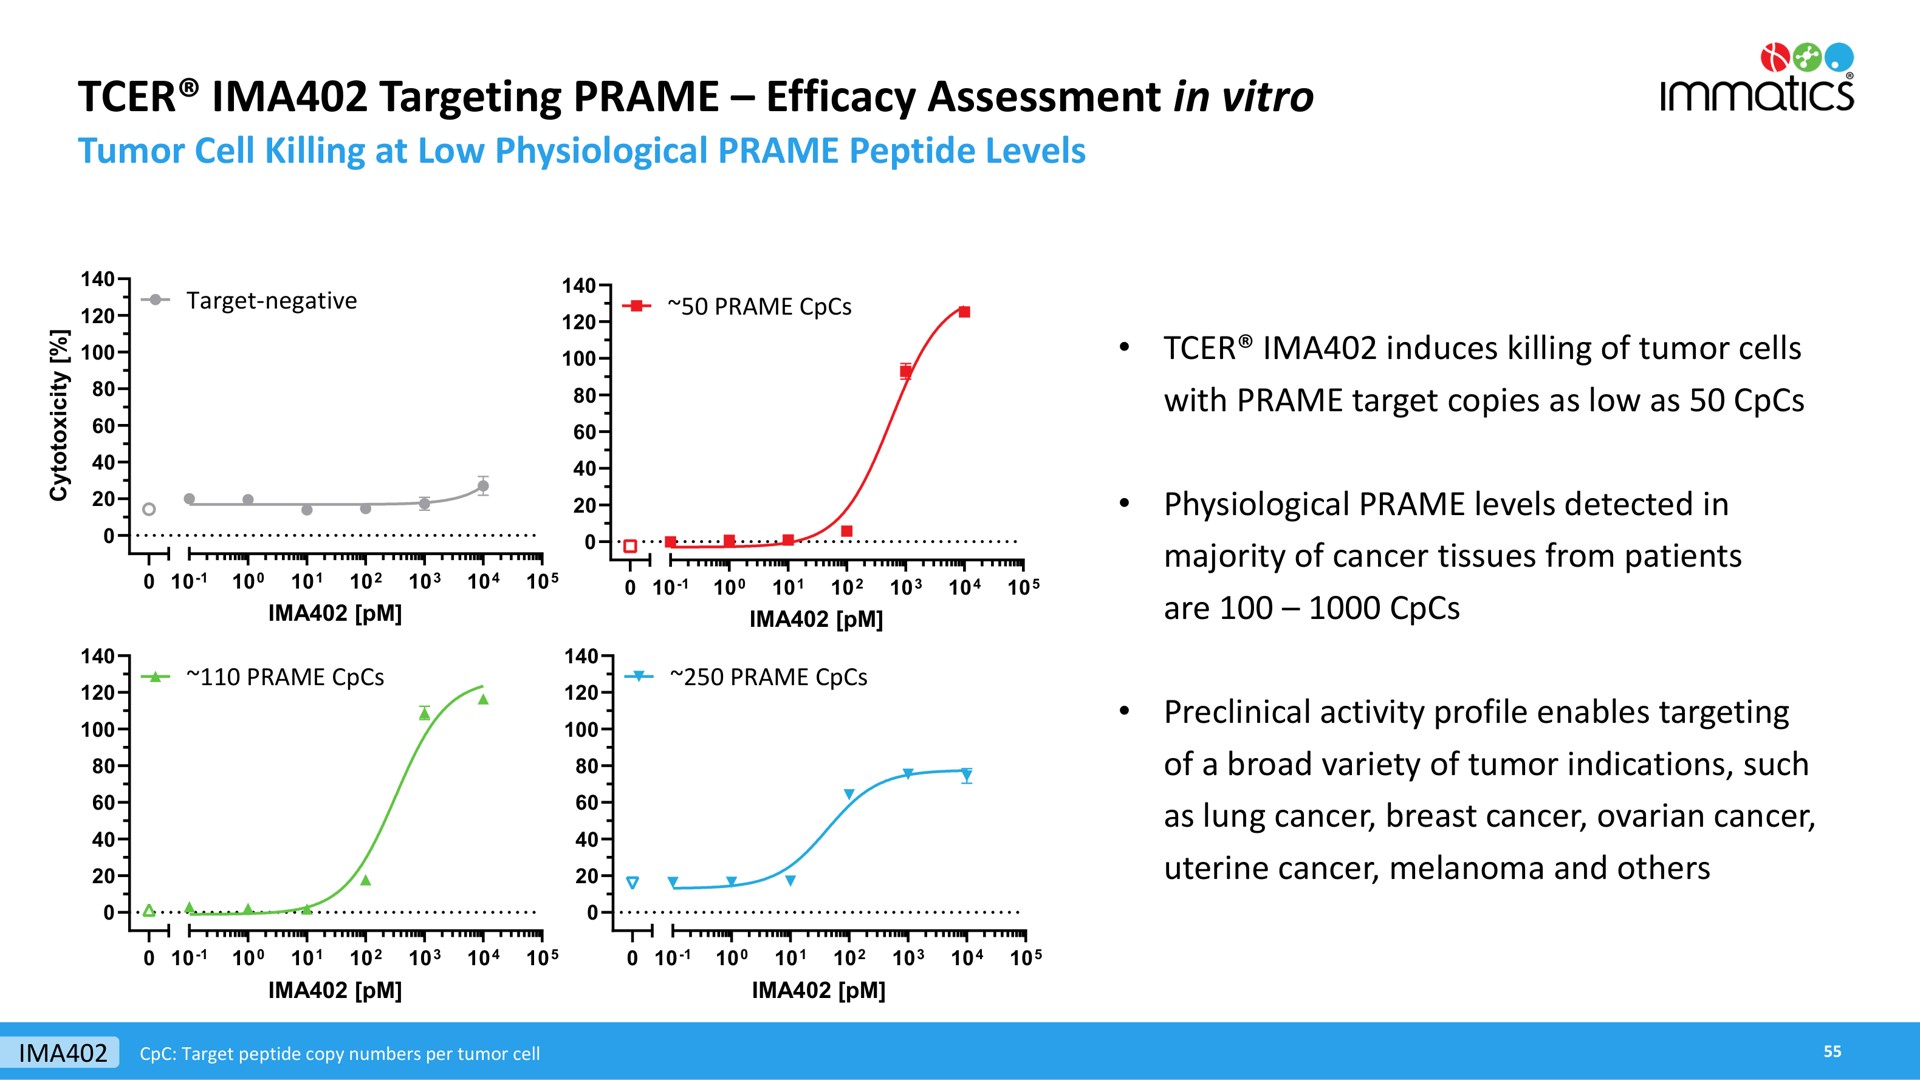 targeting efficacy assessment in so | Immatics